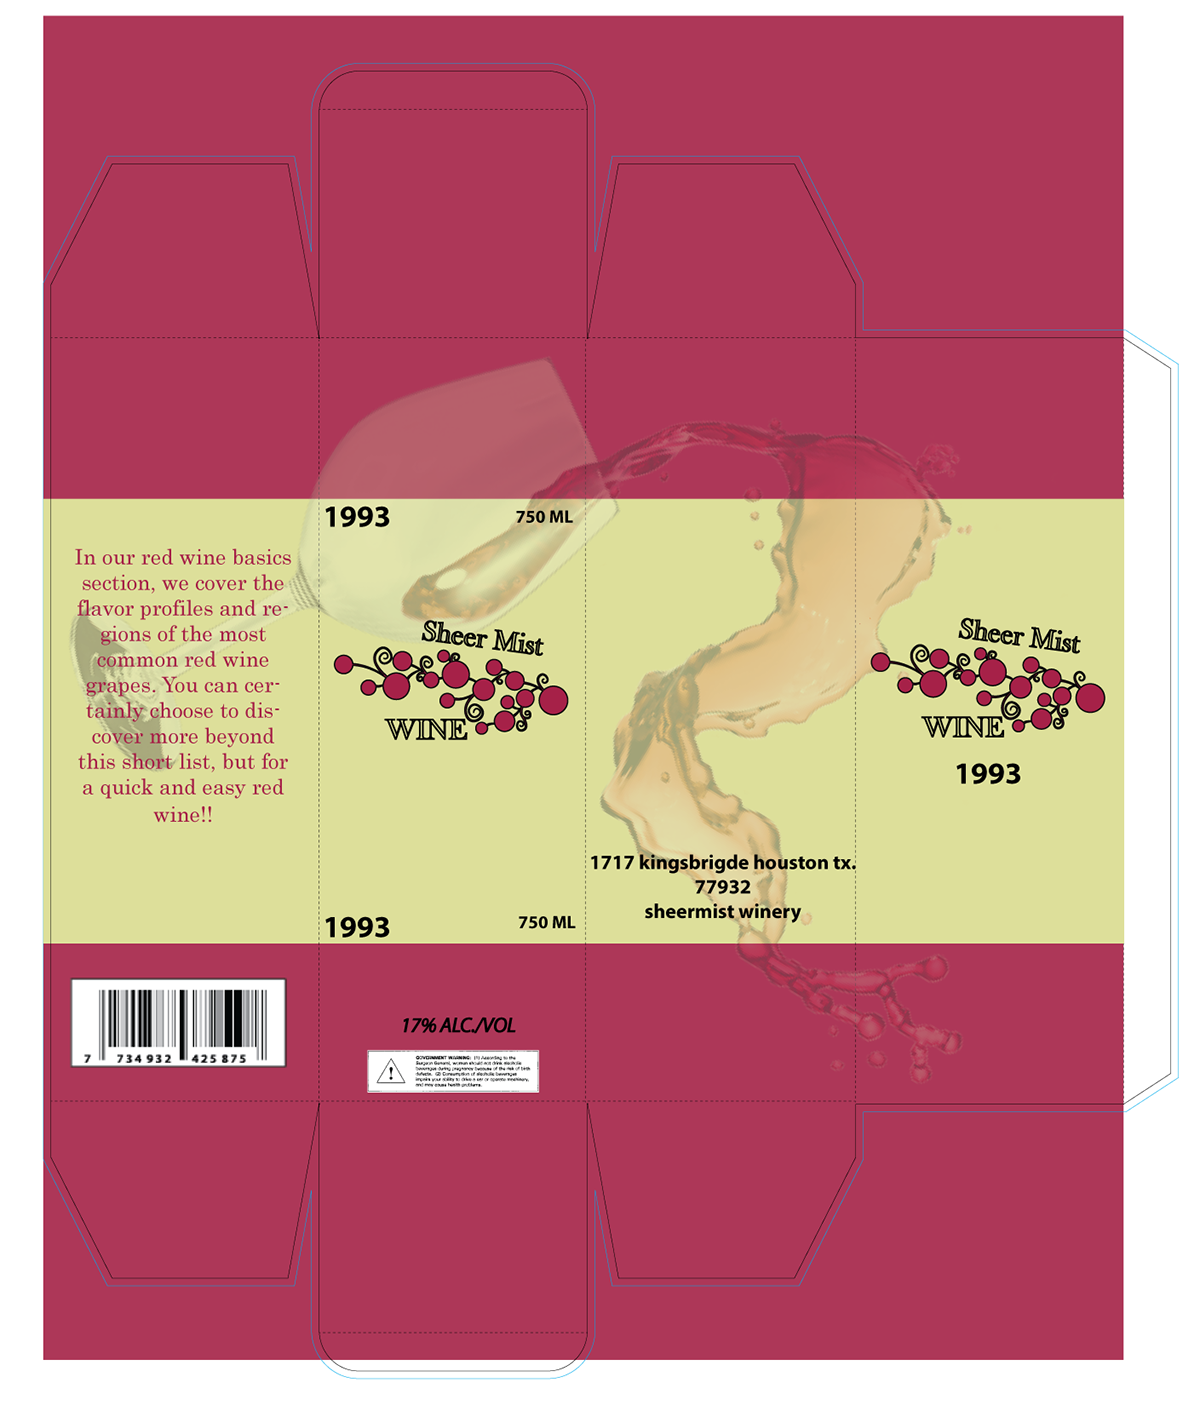 CD cover package design  Creativity lables Milk Carton adverting wine lables